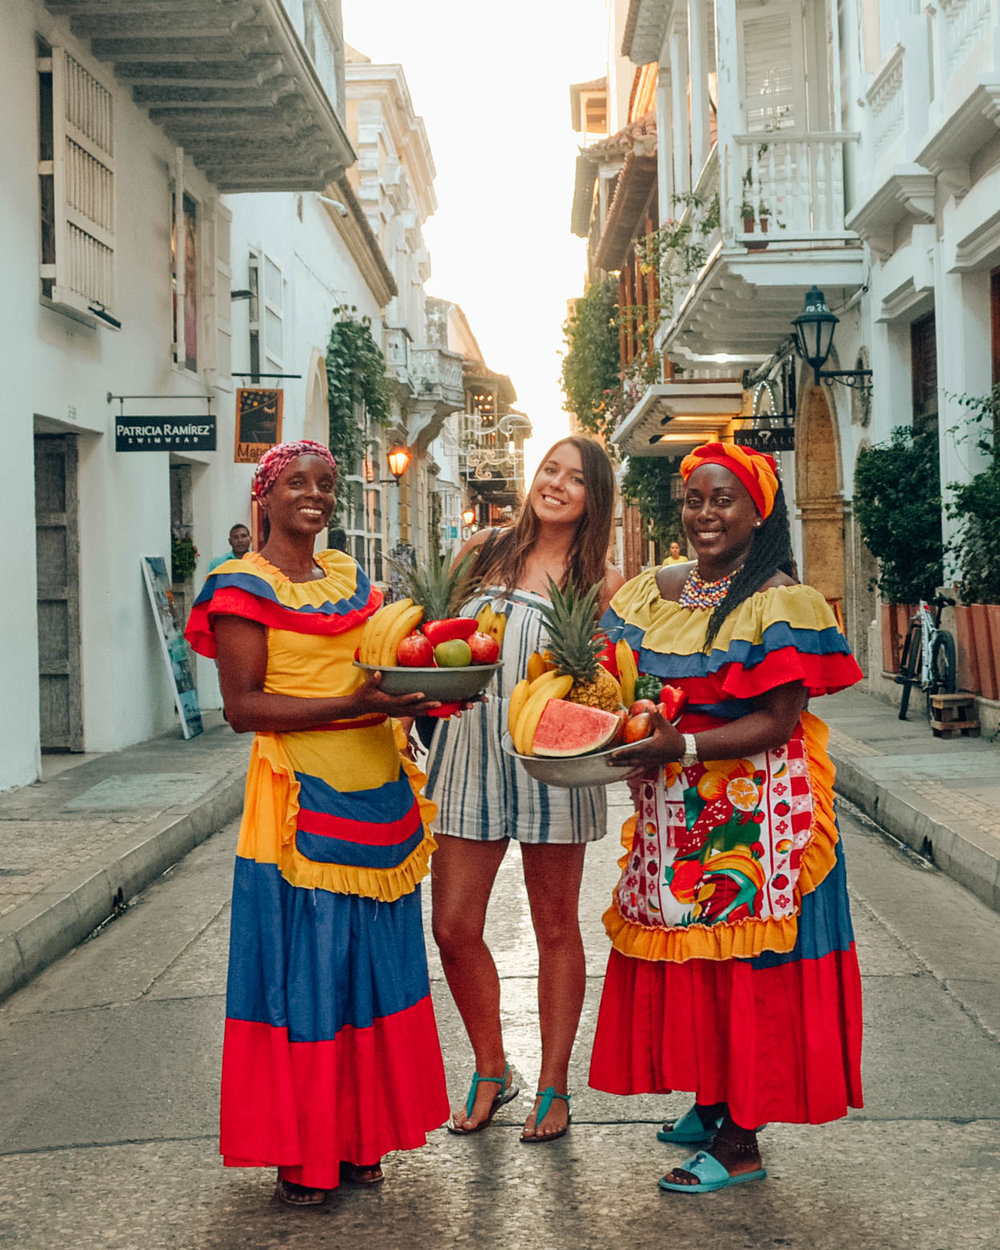  The Best Time to Visit Cartagena